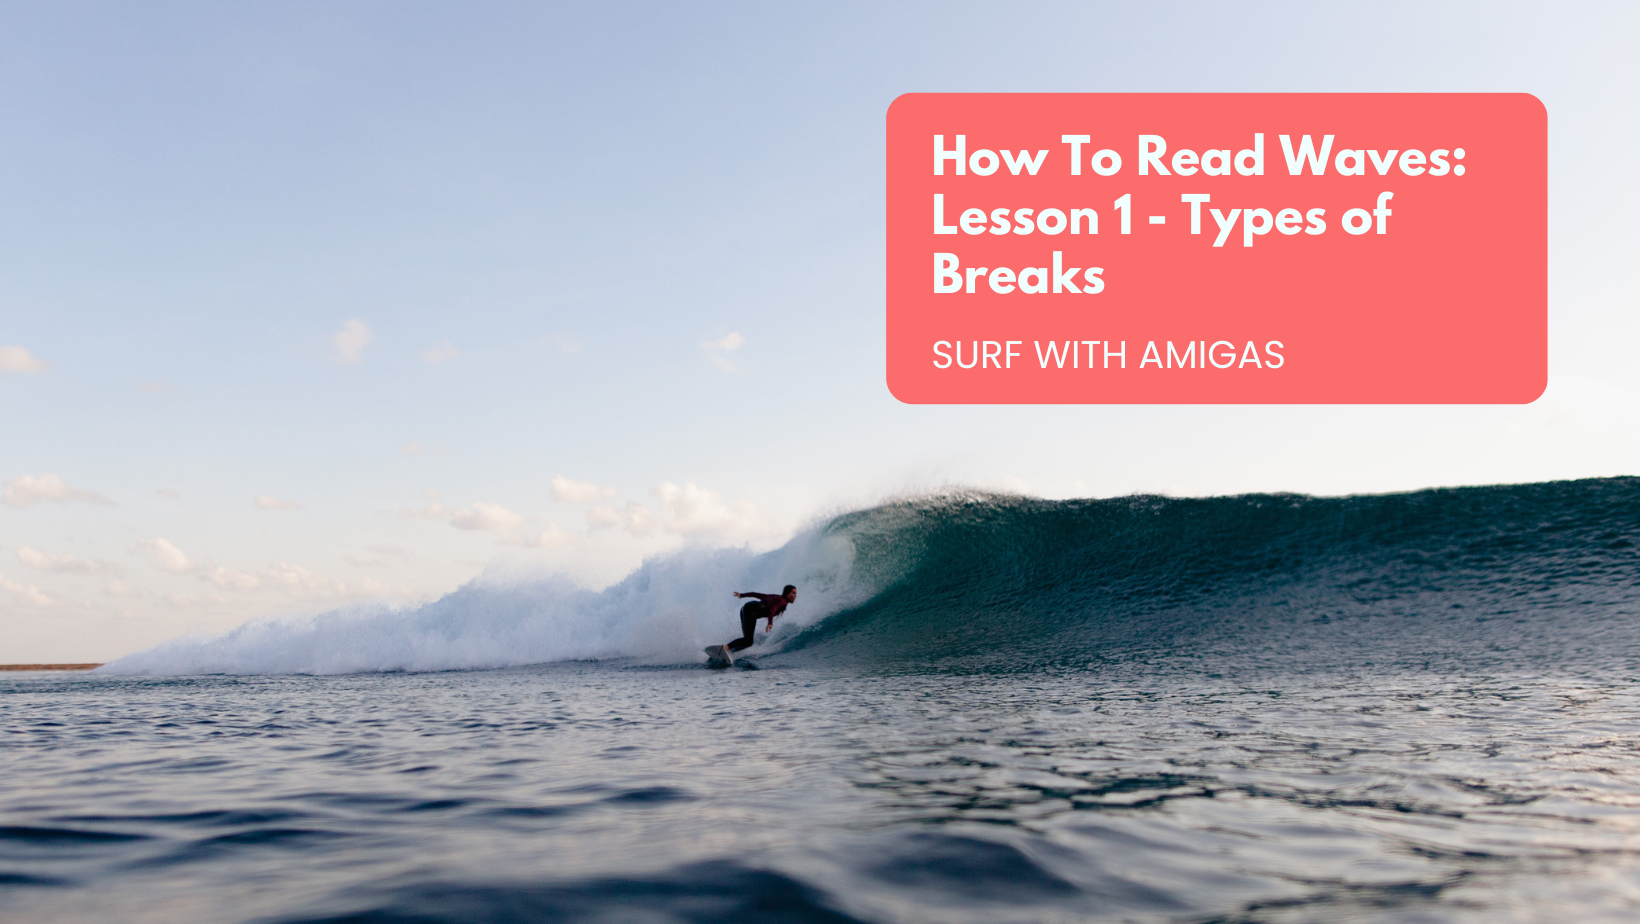 How To Read Waves: Lesson 1 - Types of Breaks